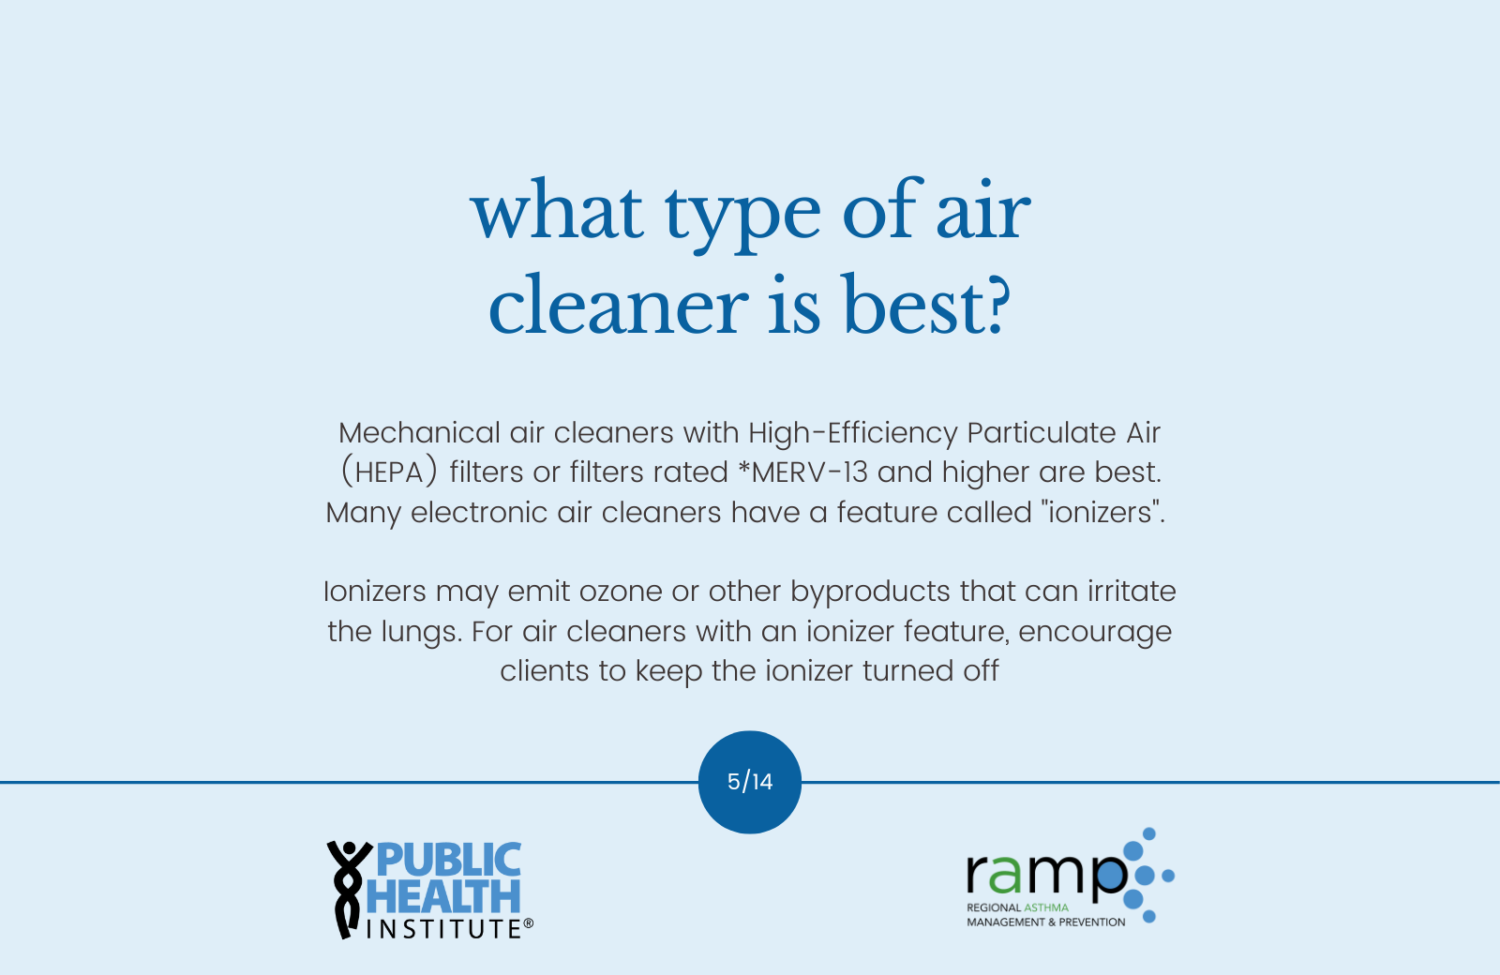 What type of air cleaner is best? Mechanical air cleaners with High-Efficiency Particulate Air (HEPA) filters or filters rated *MERV-13 and higher are best. Many electronic air cleaners have a feature called "ionizers". Ionizers may emit ozone or other byproducts that can irritate the lungs. For air cleaners with an ionizer feature, encourage clients to keep the ionizer turned off